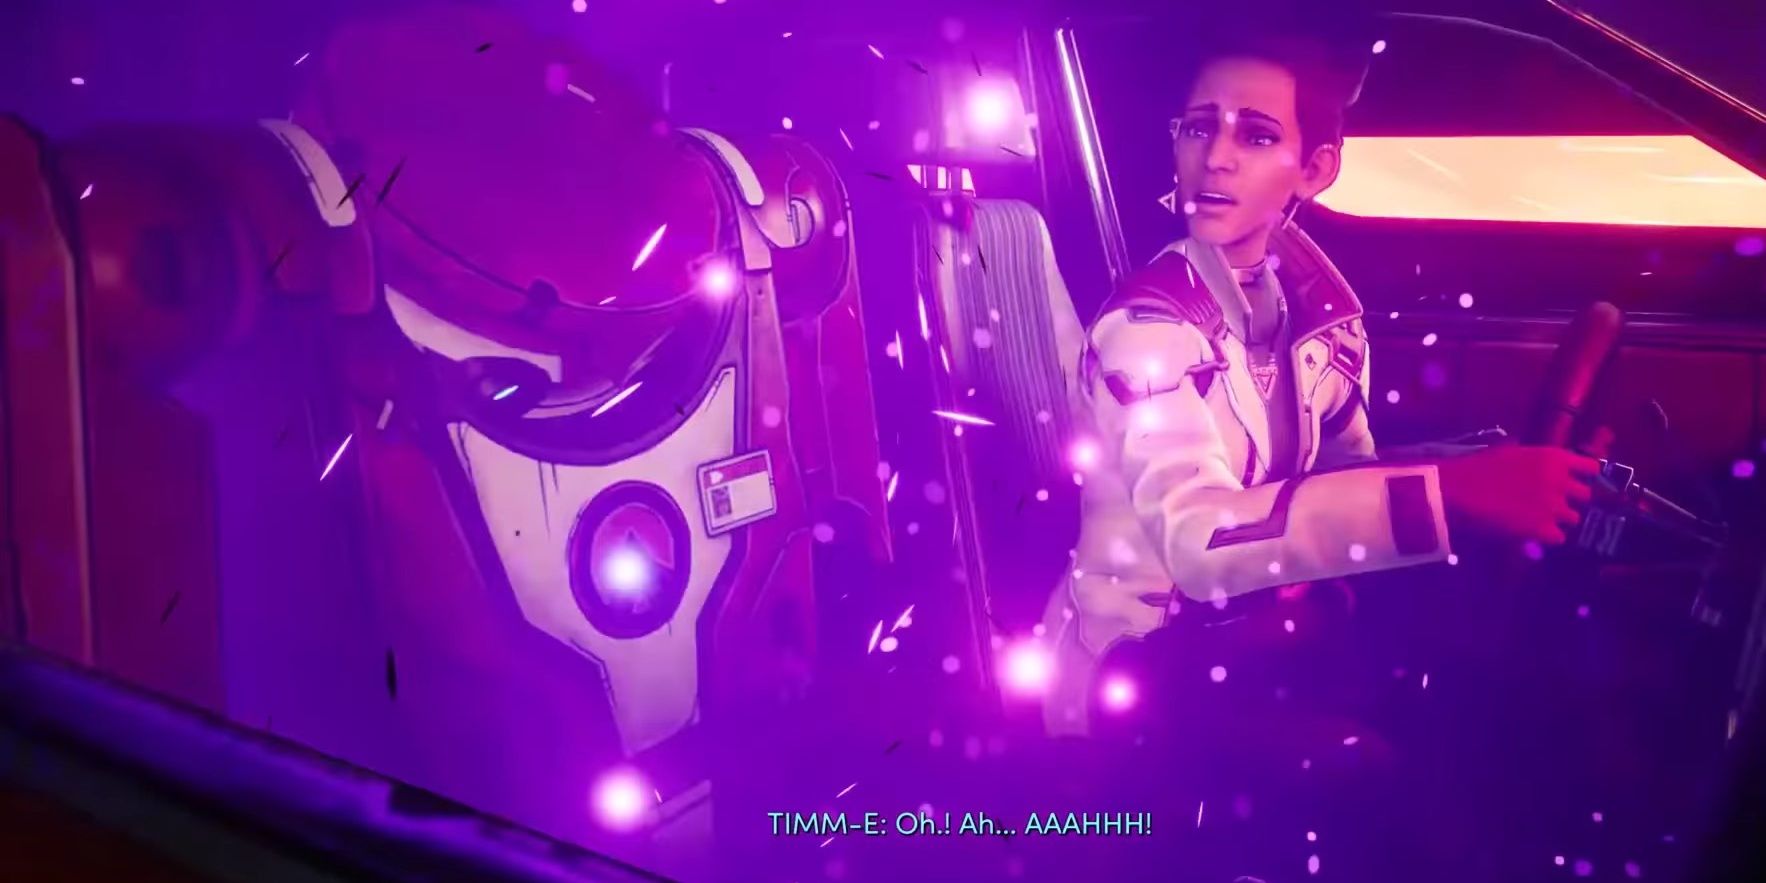 Screenshot of TIMM-E popping into Anu's escape pod in the beginning of New Tales from the Borderlands.